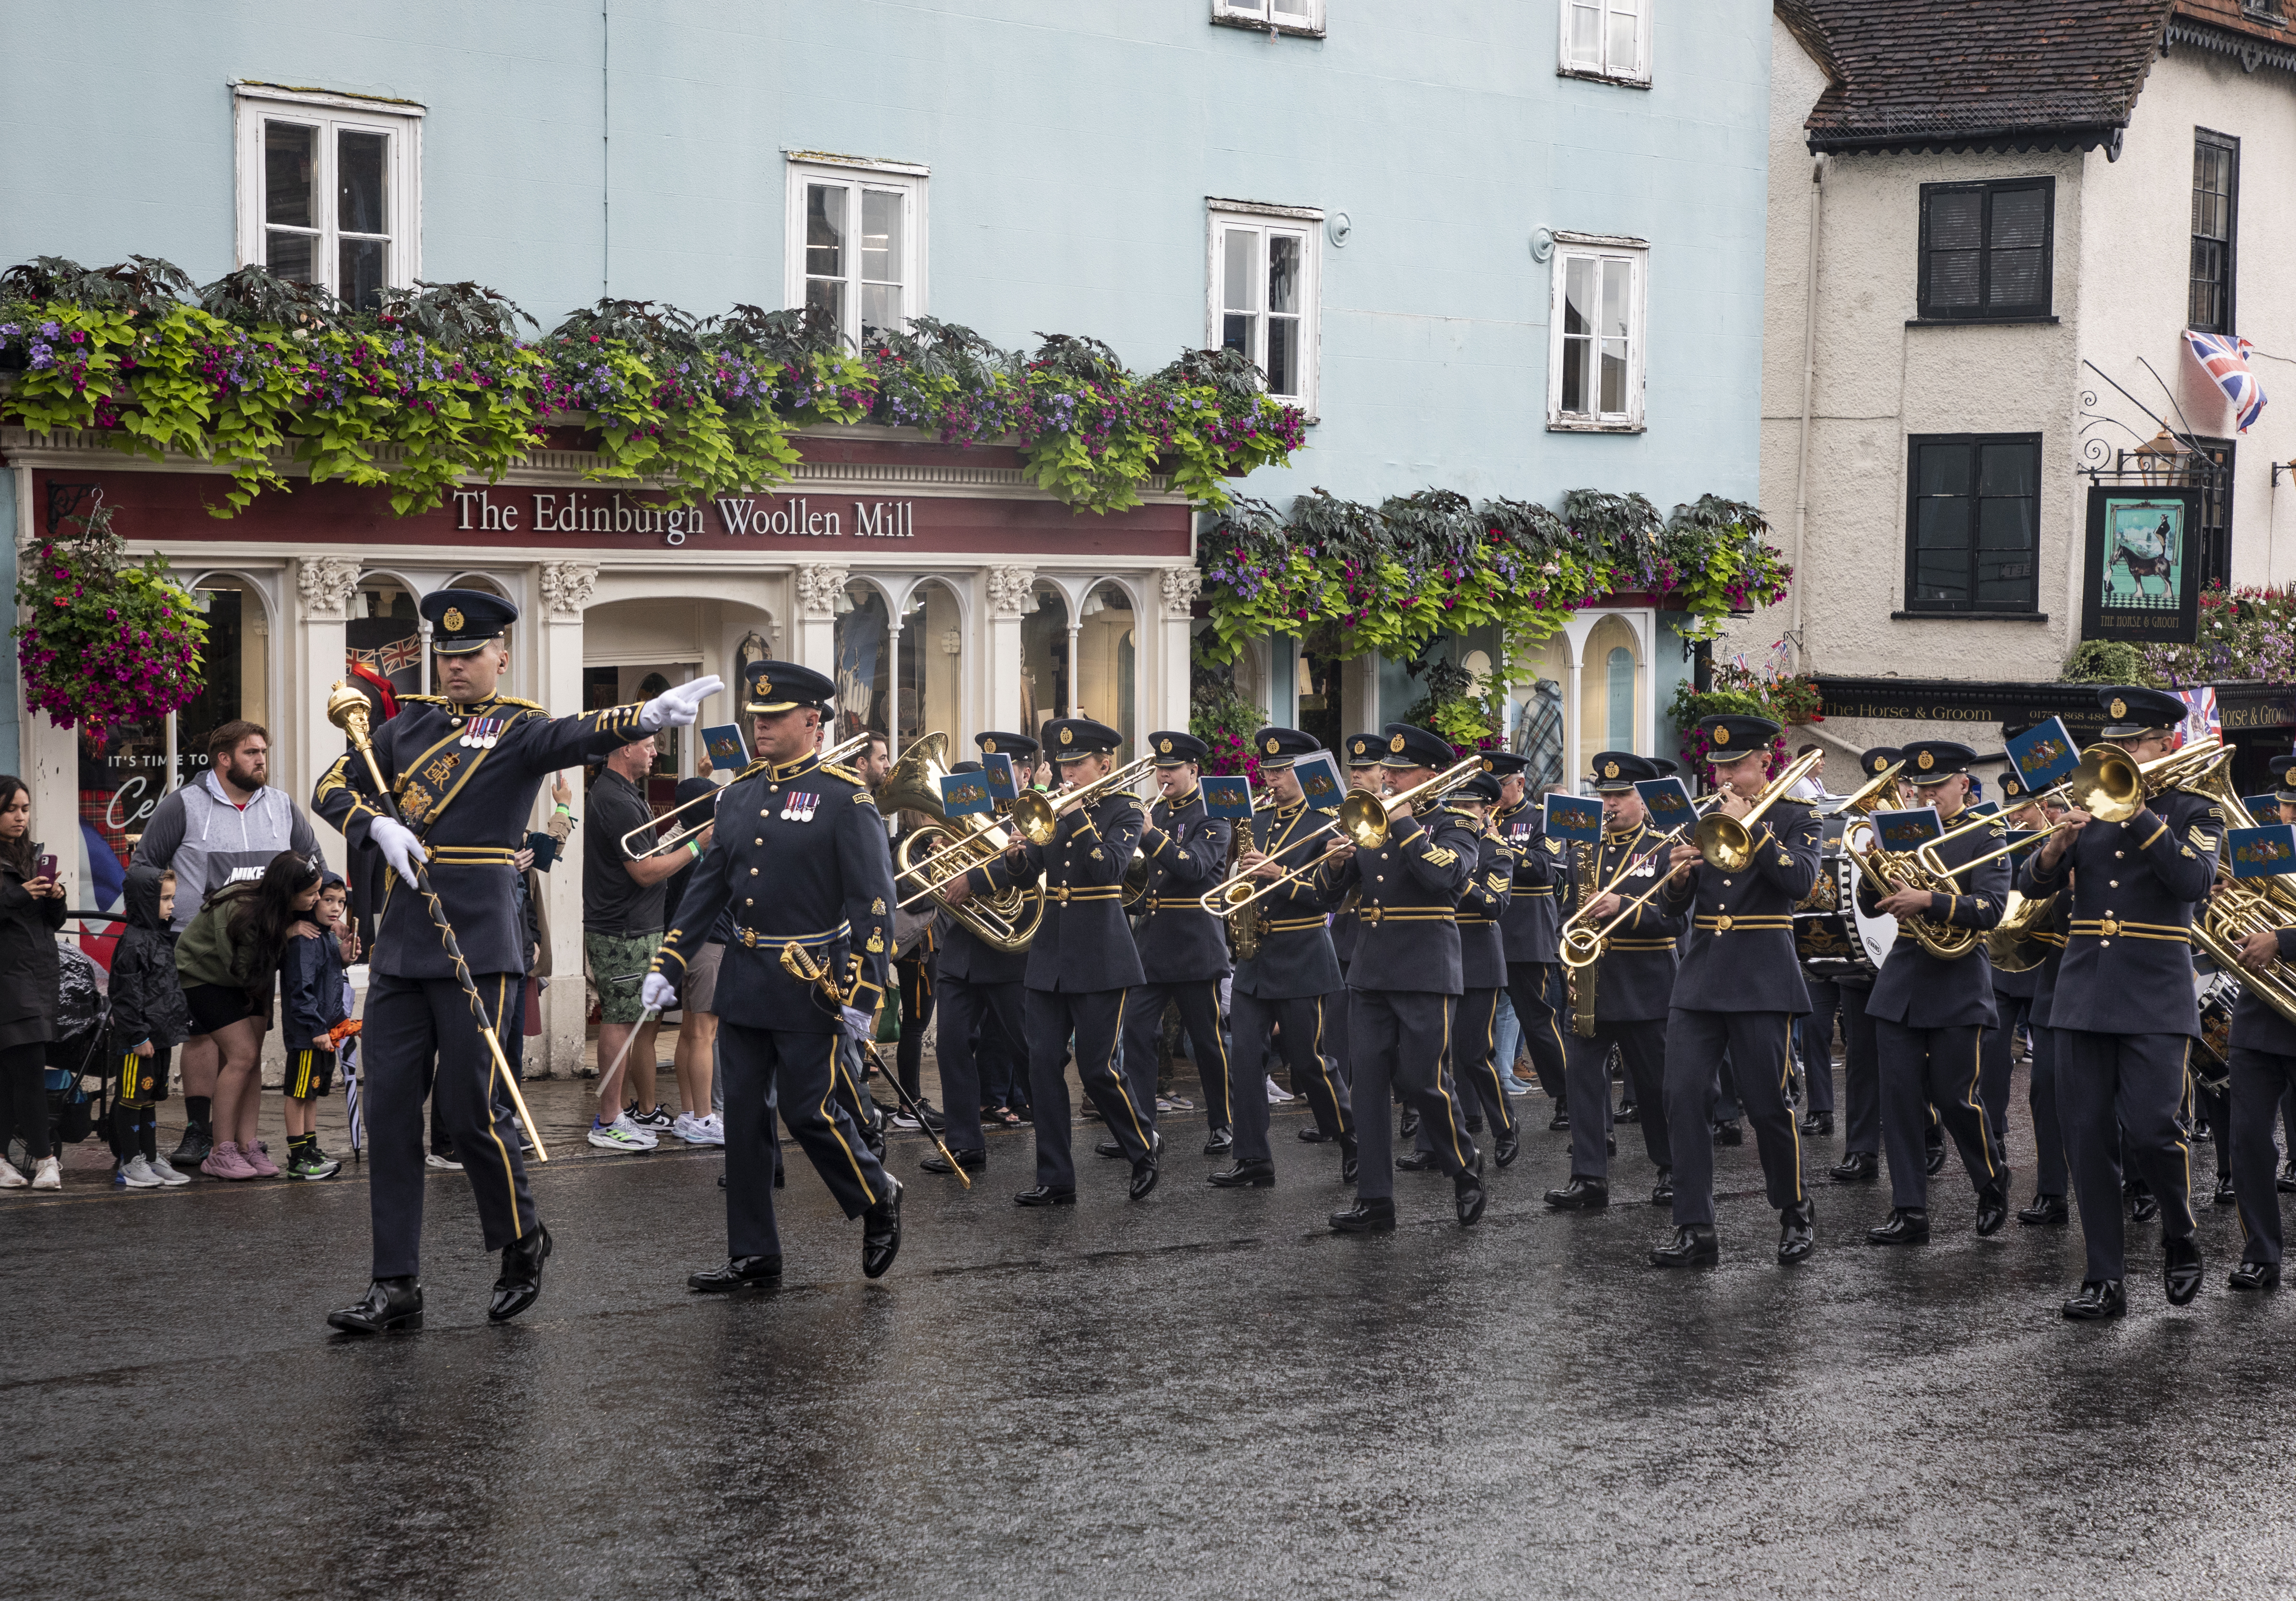 Band of The Royal Air Force Regiment